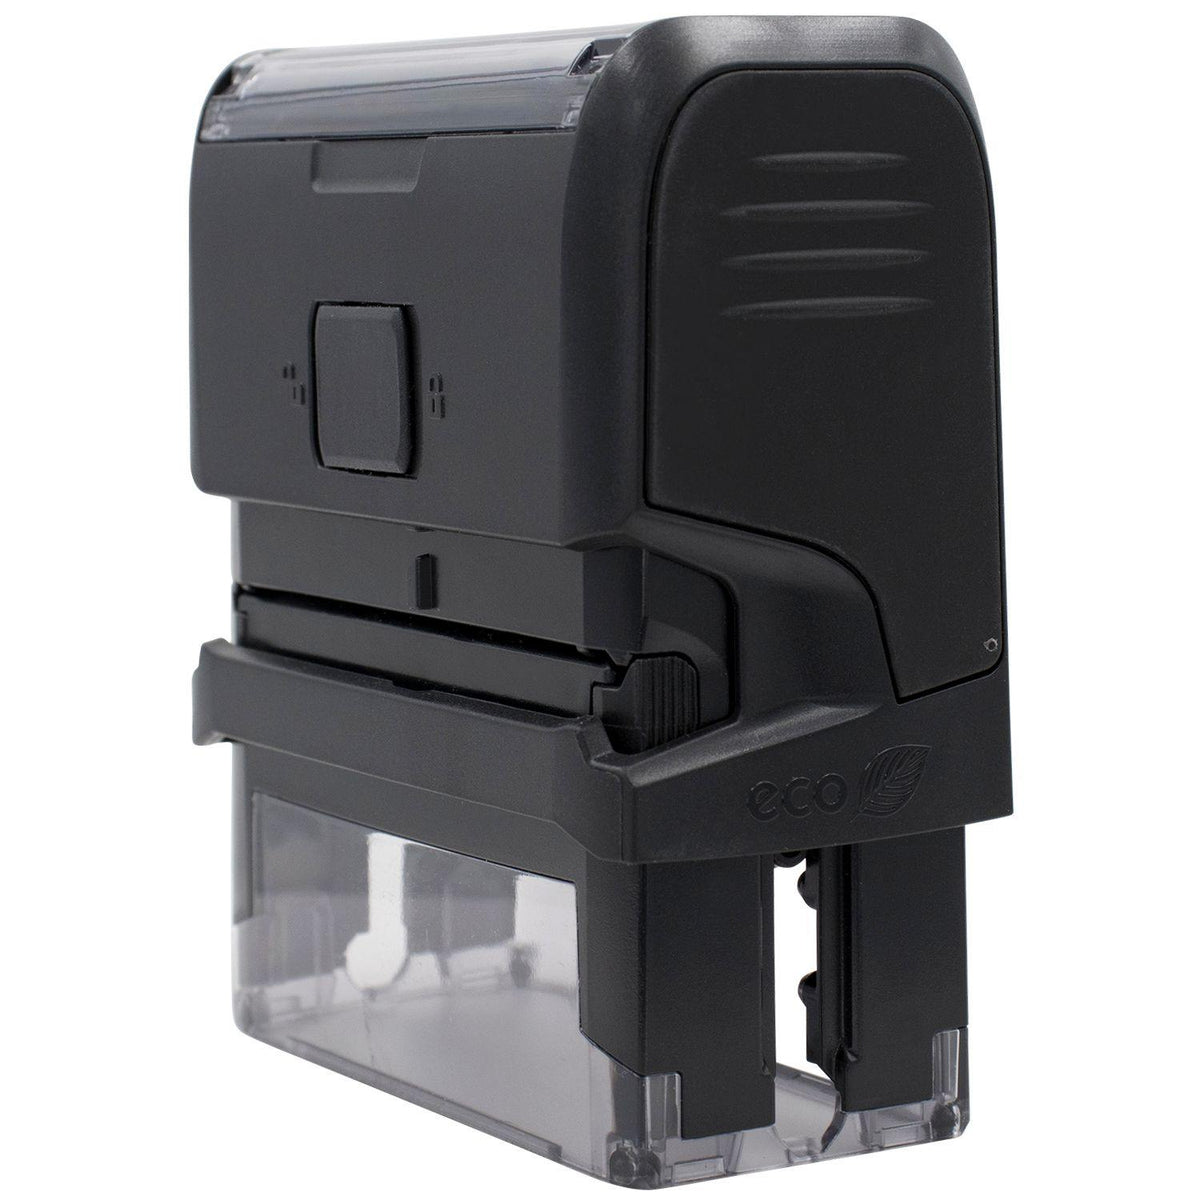 Self-Inking Do Not X-Ray Stamp - Engineer Seal Stamps - Brand_Trodat, Impression Size_Small, Stamp Type_Self-Inking Stamp, Type of Use_Medical Office